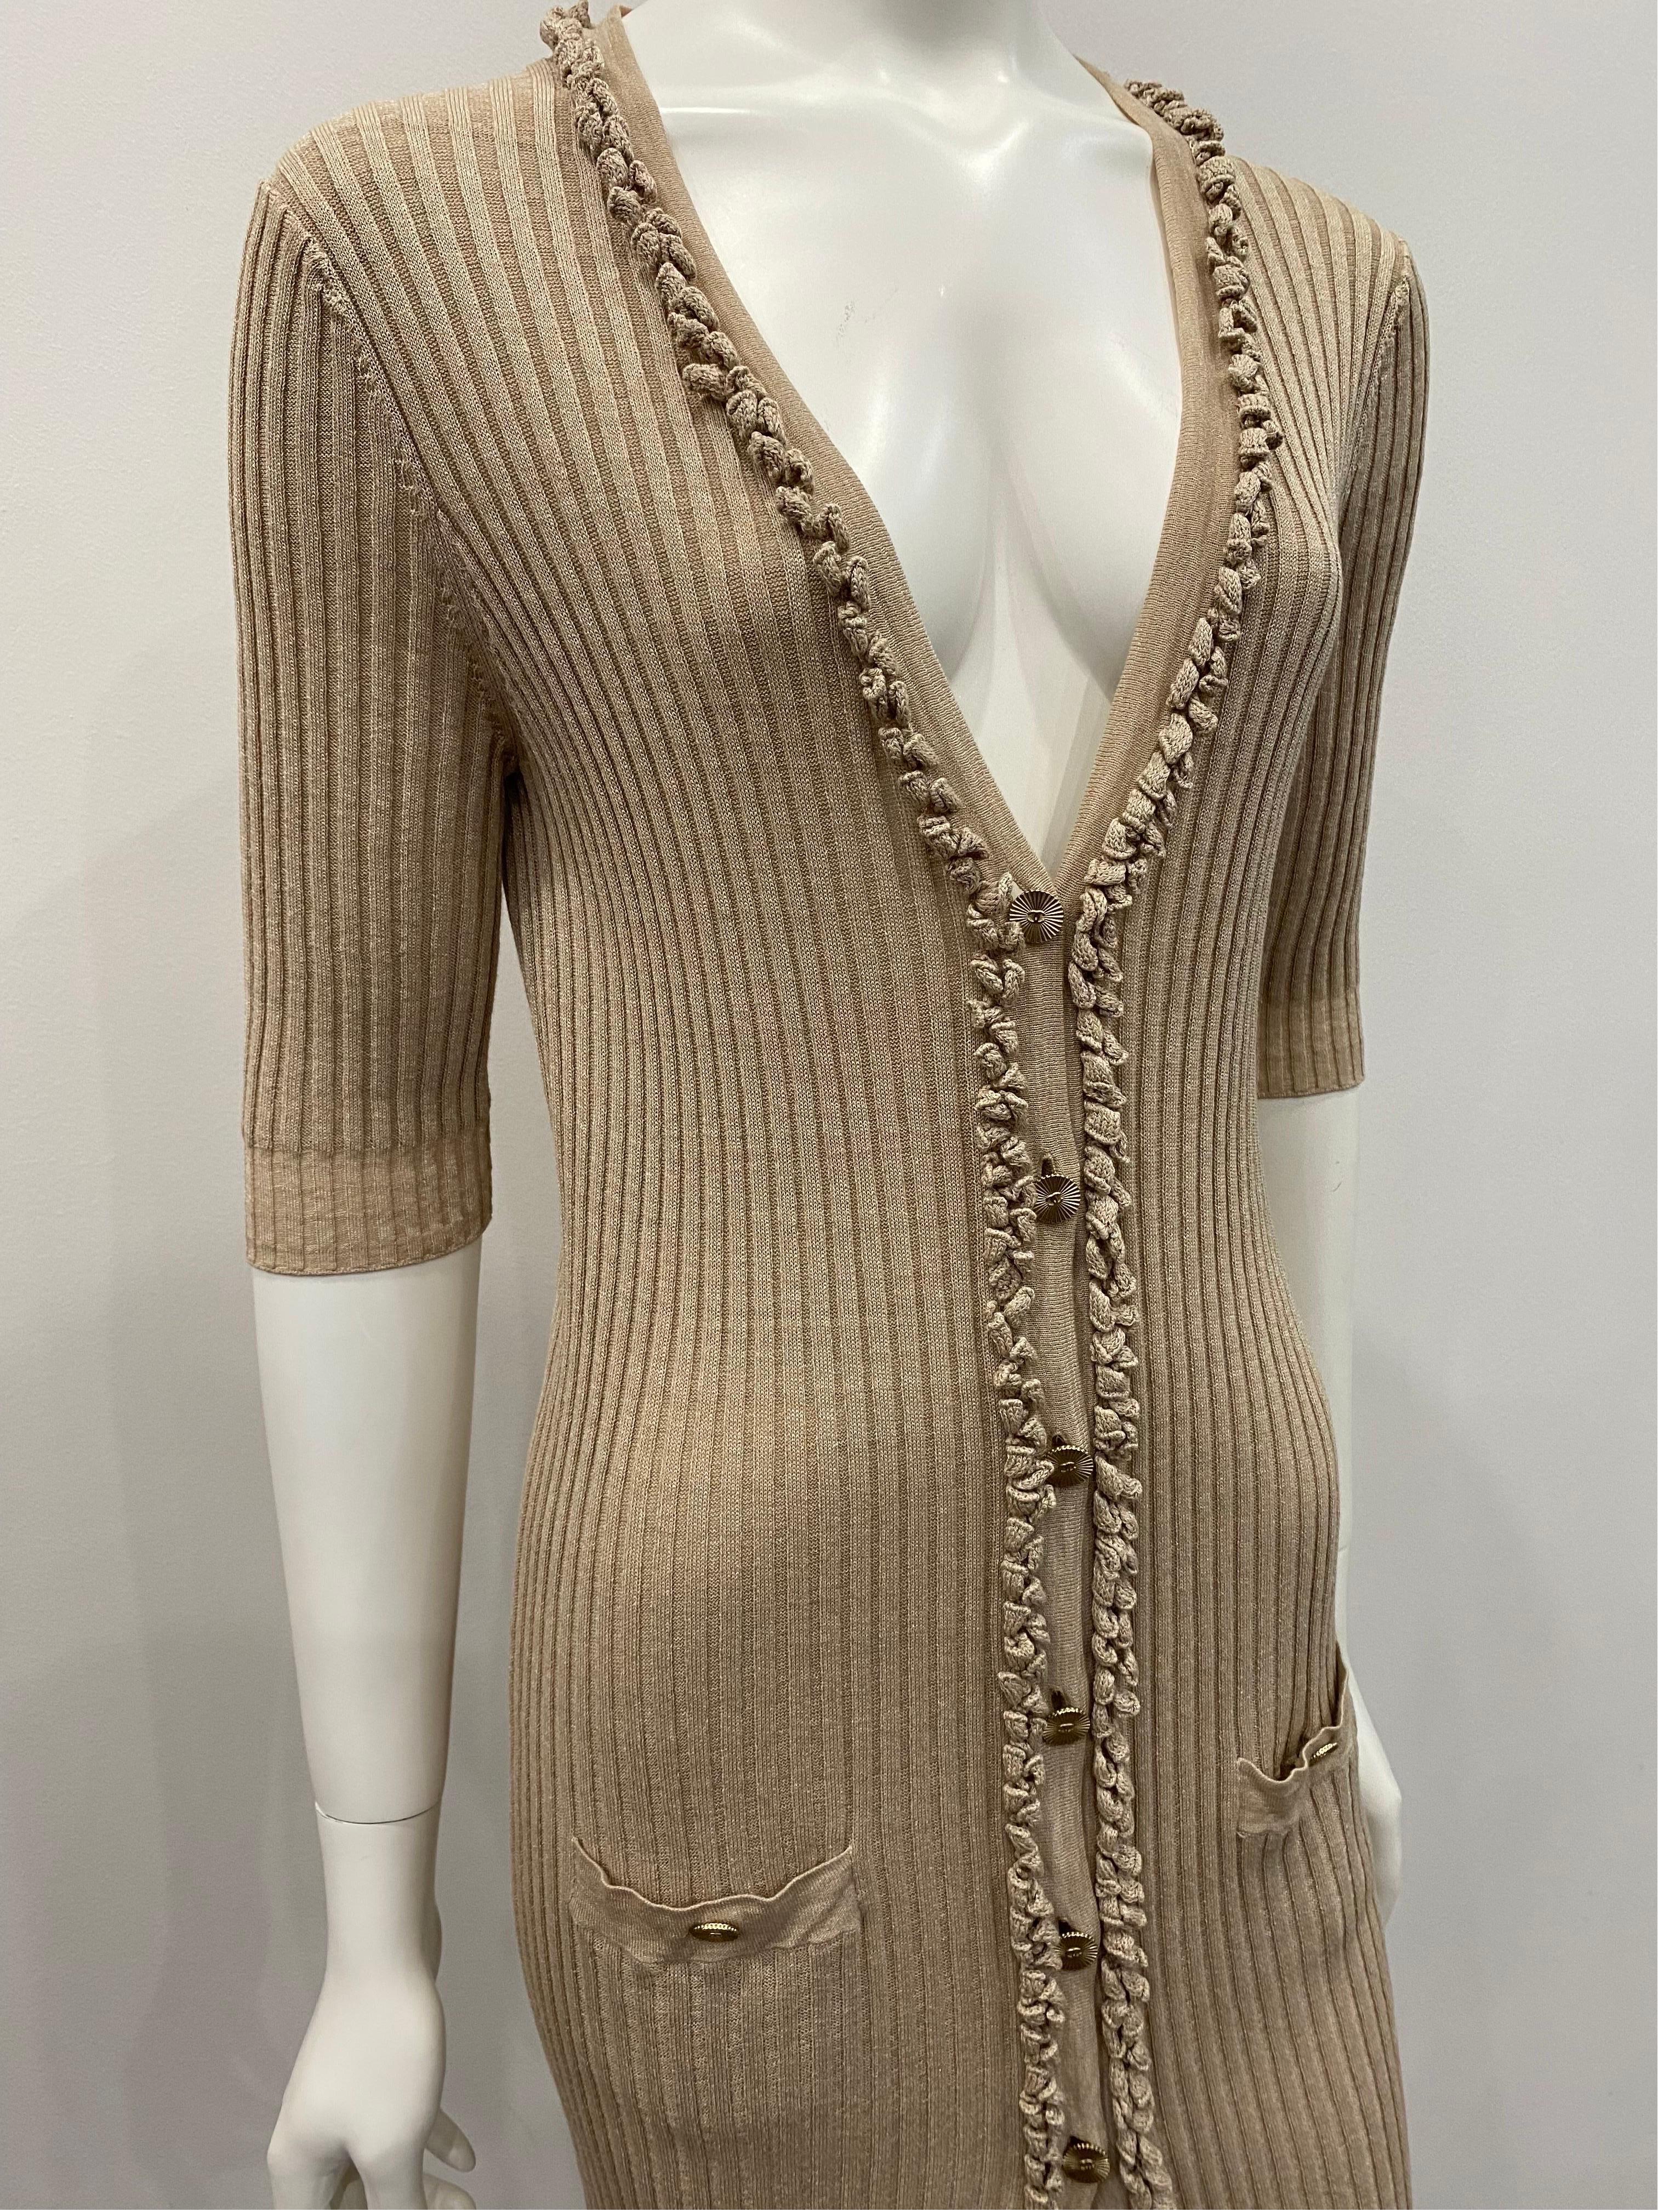 Chanel Champagne Cotton Knit 3/4 Sleeve Sleeve Dress/Coat - Sz 38 In Good Condition For Sale In West Palm Beach, FL